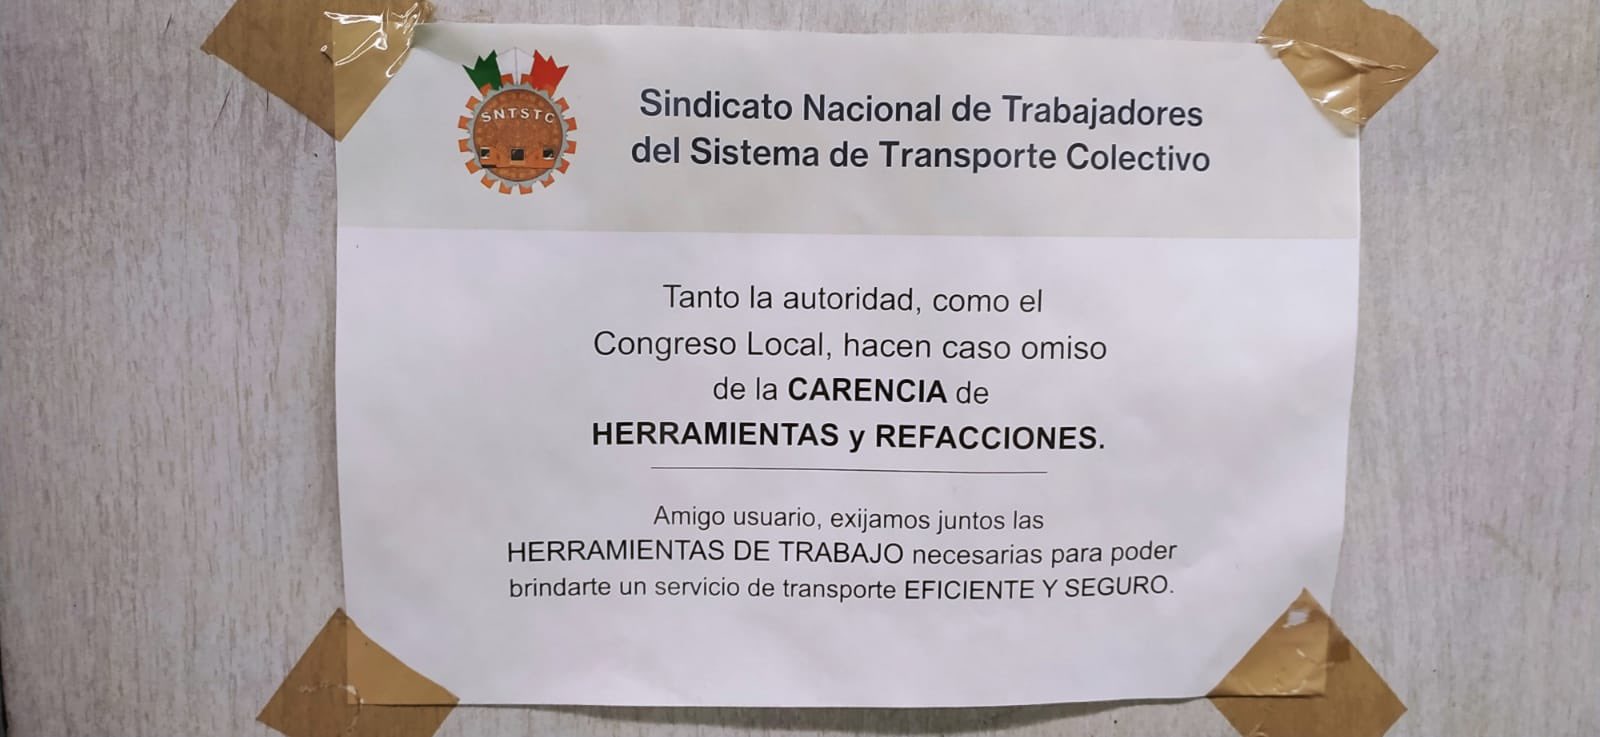 In subway cars of Line 3, workers pointed out irregularities in notices like these (screenshot)